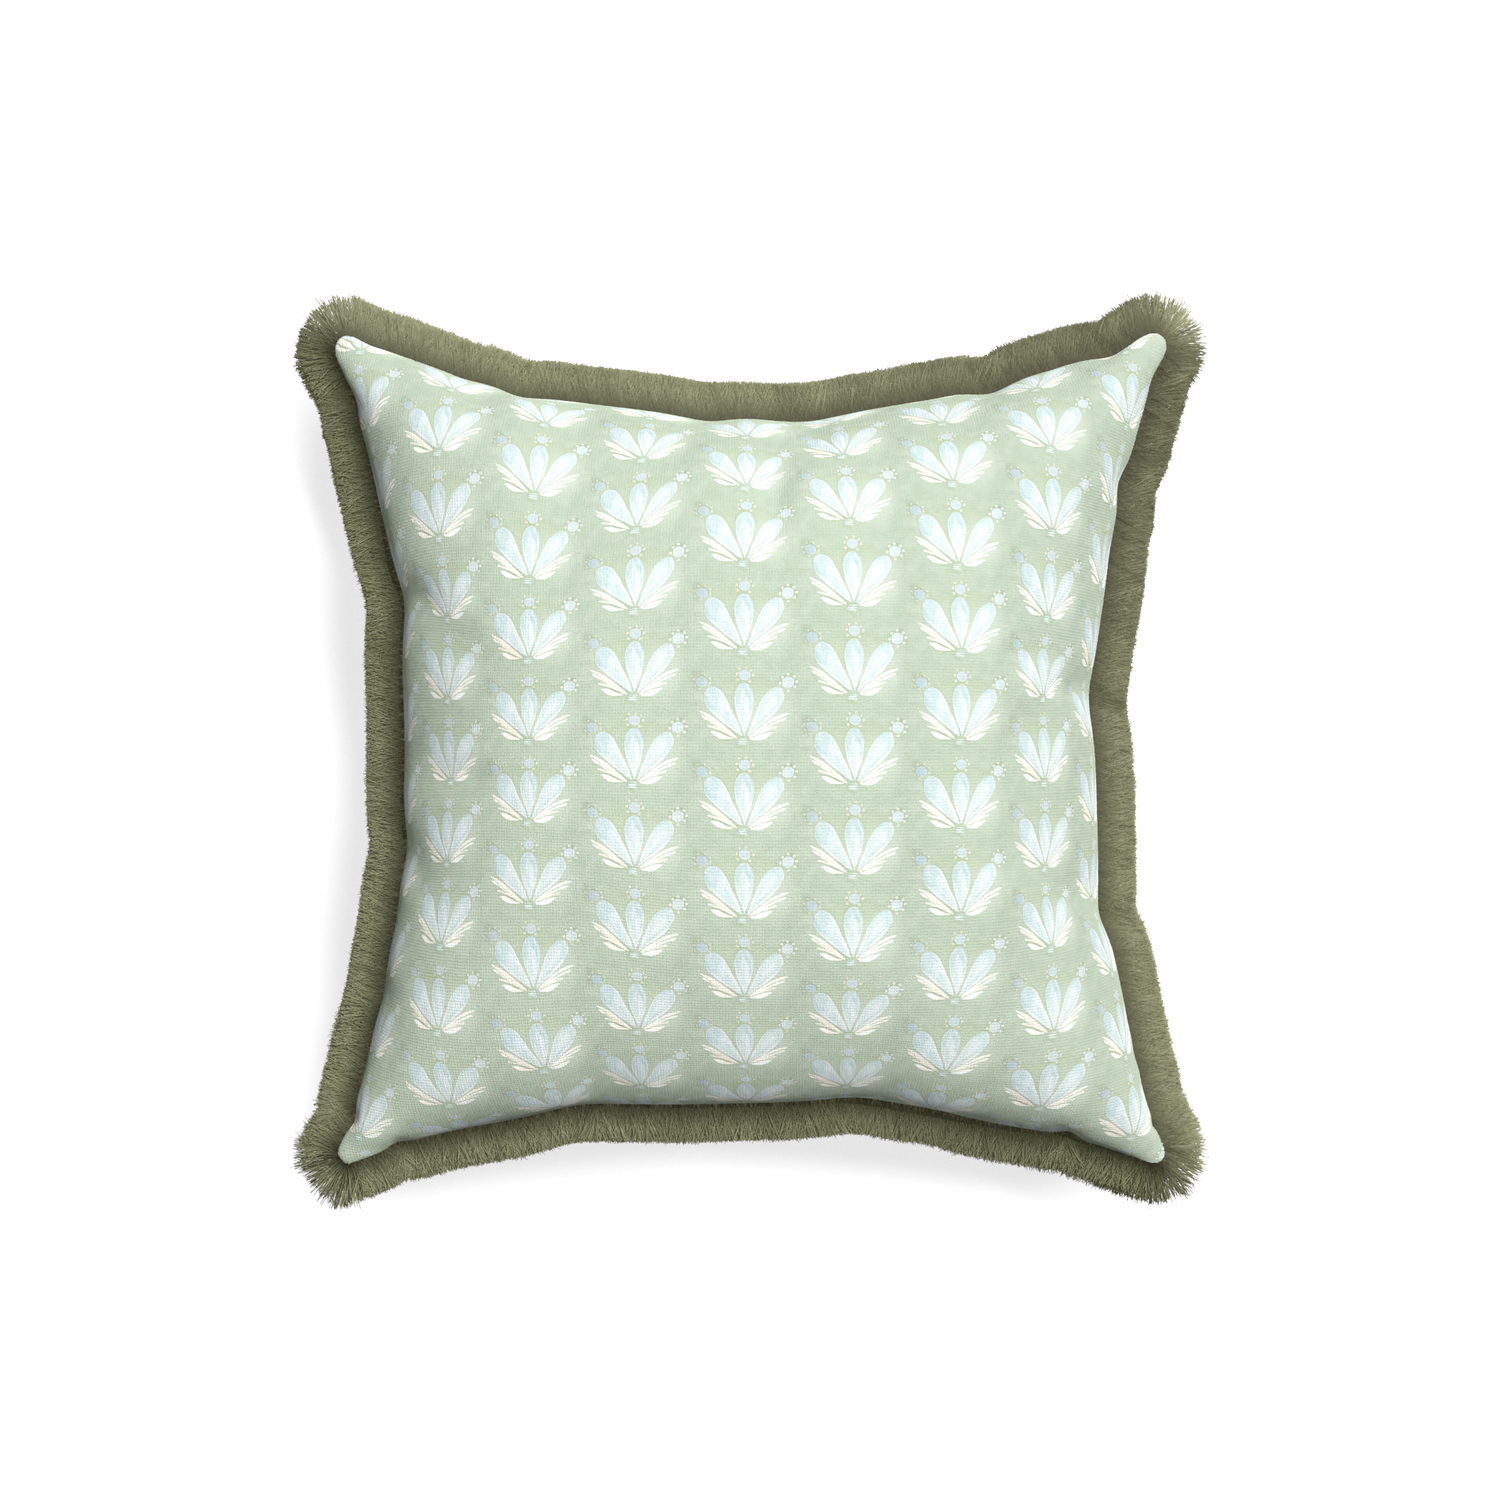 18-square serena sea salt custom blue & green floral drop repeatpillow with sage fringe on white background